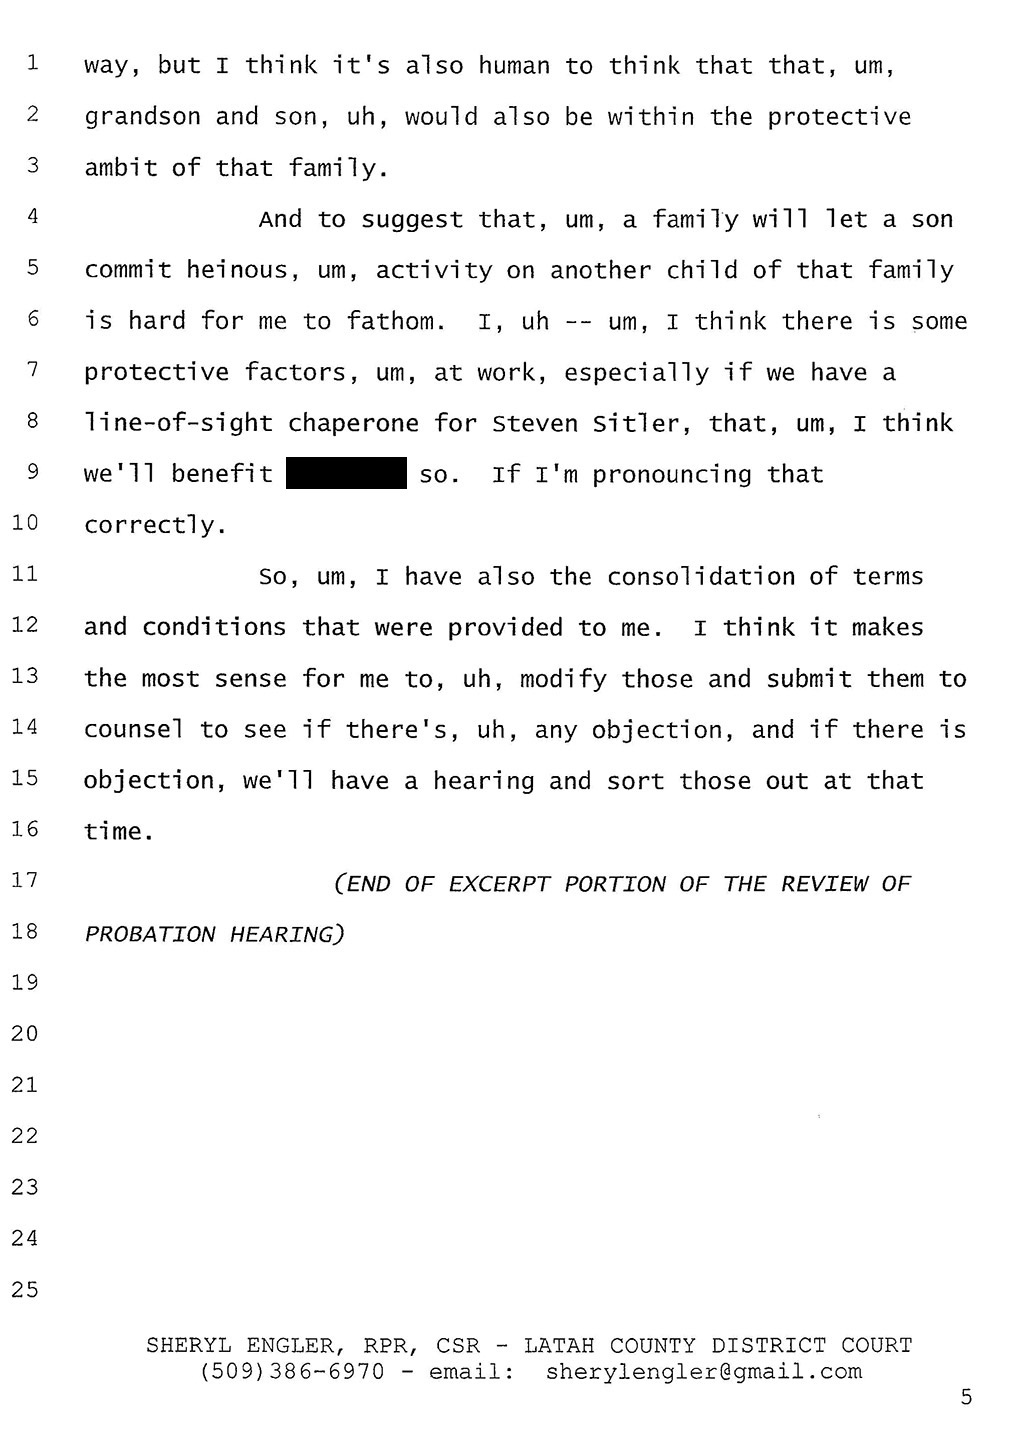 Exhibit B: Excerpted Court Transcript, page 5